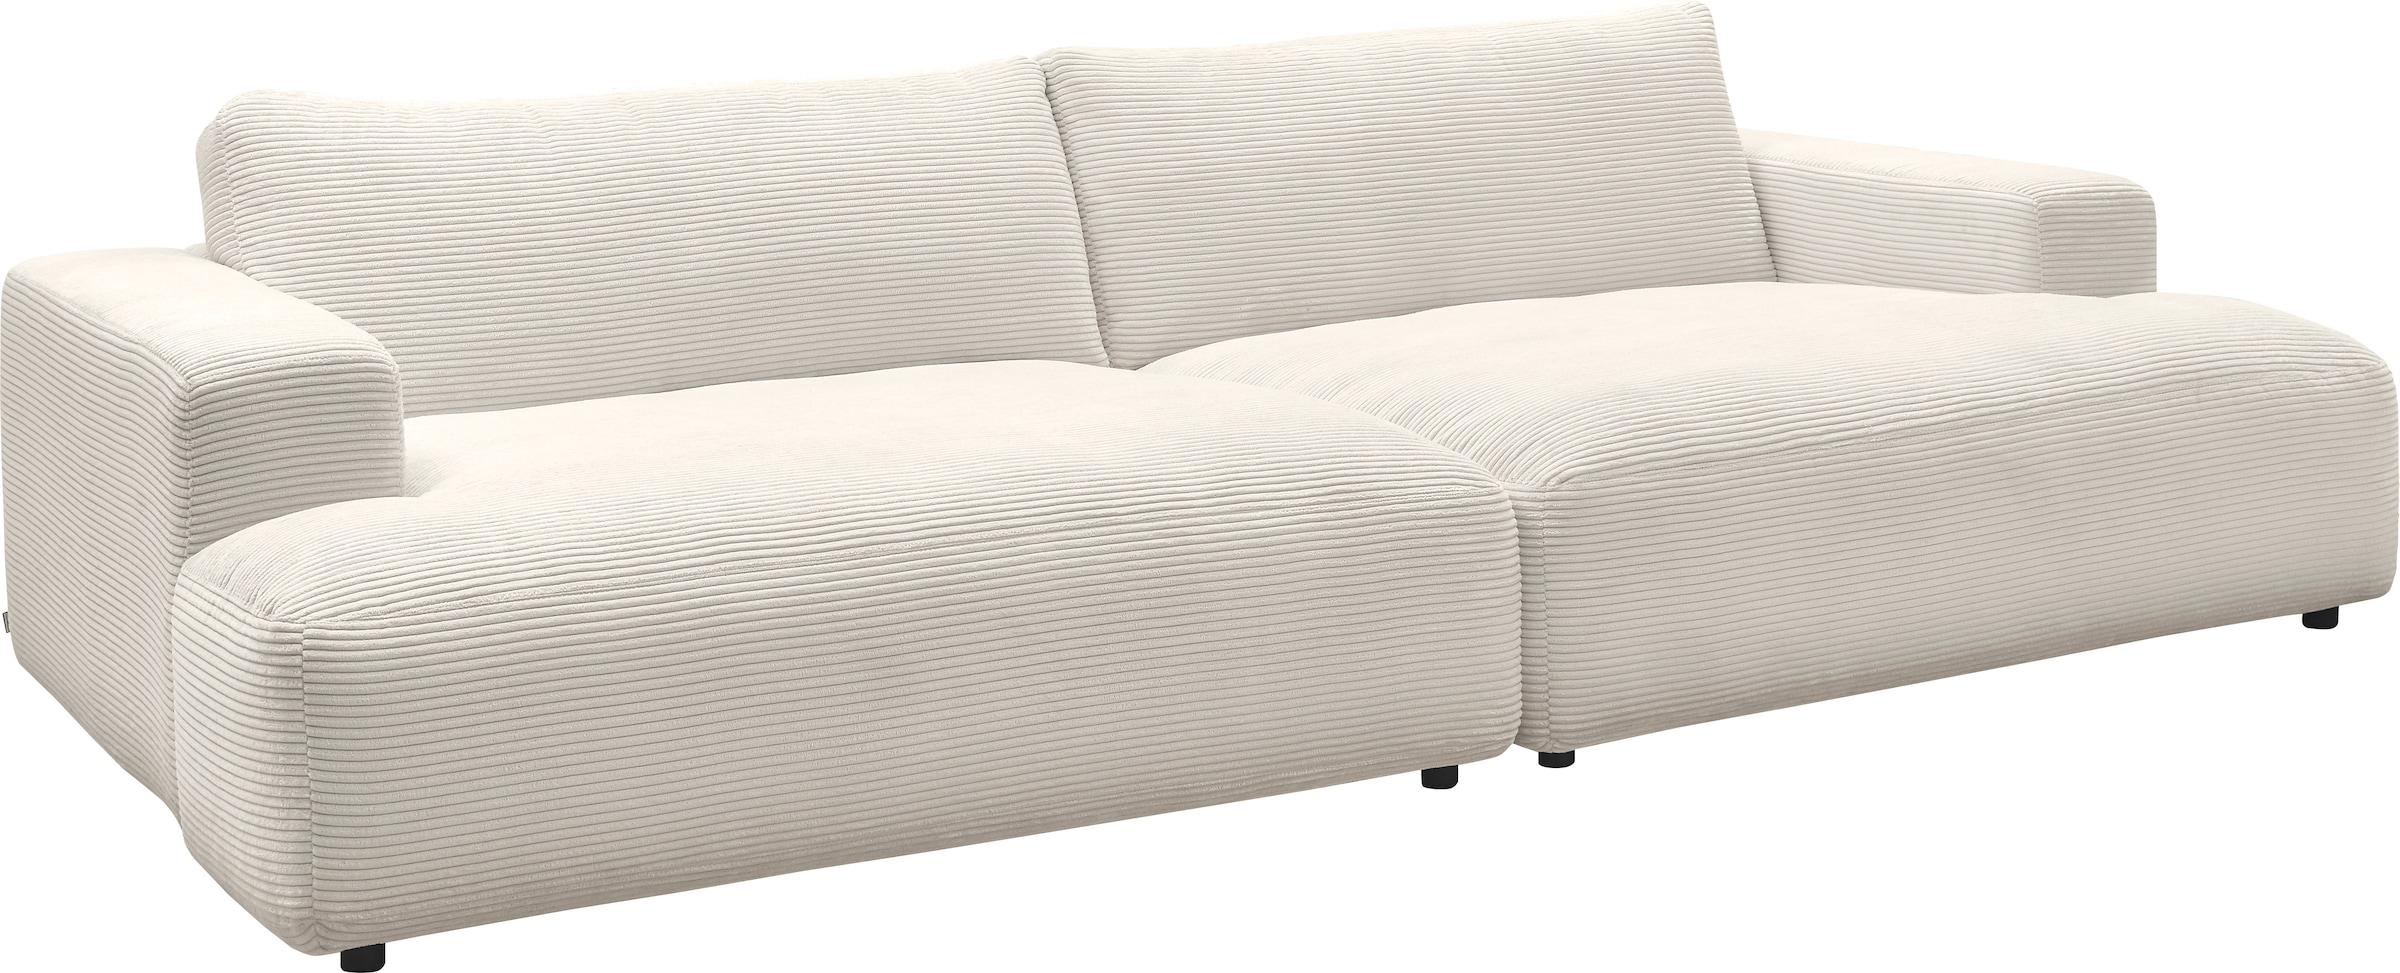 branded Musterring M Breite cm GALLERY by Cord-Bezug, »Lucia«, OTTO Shop 292 Loungesofa Online